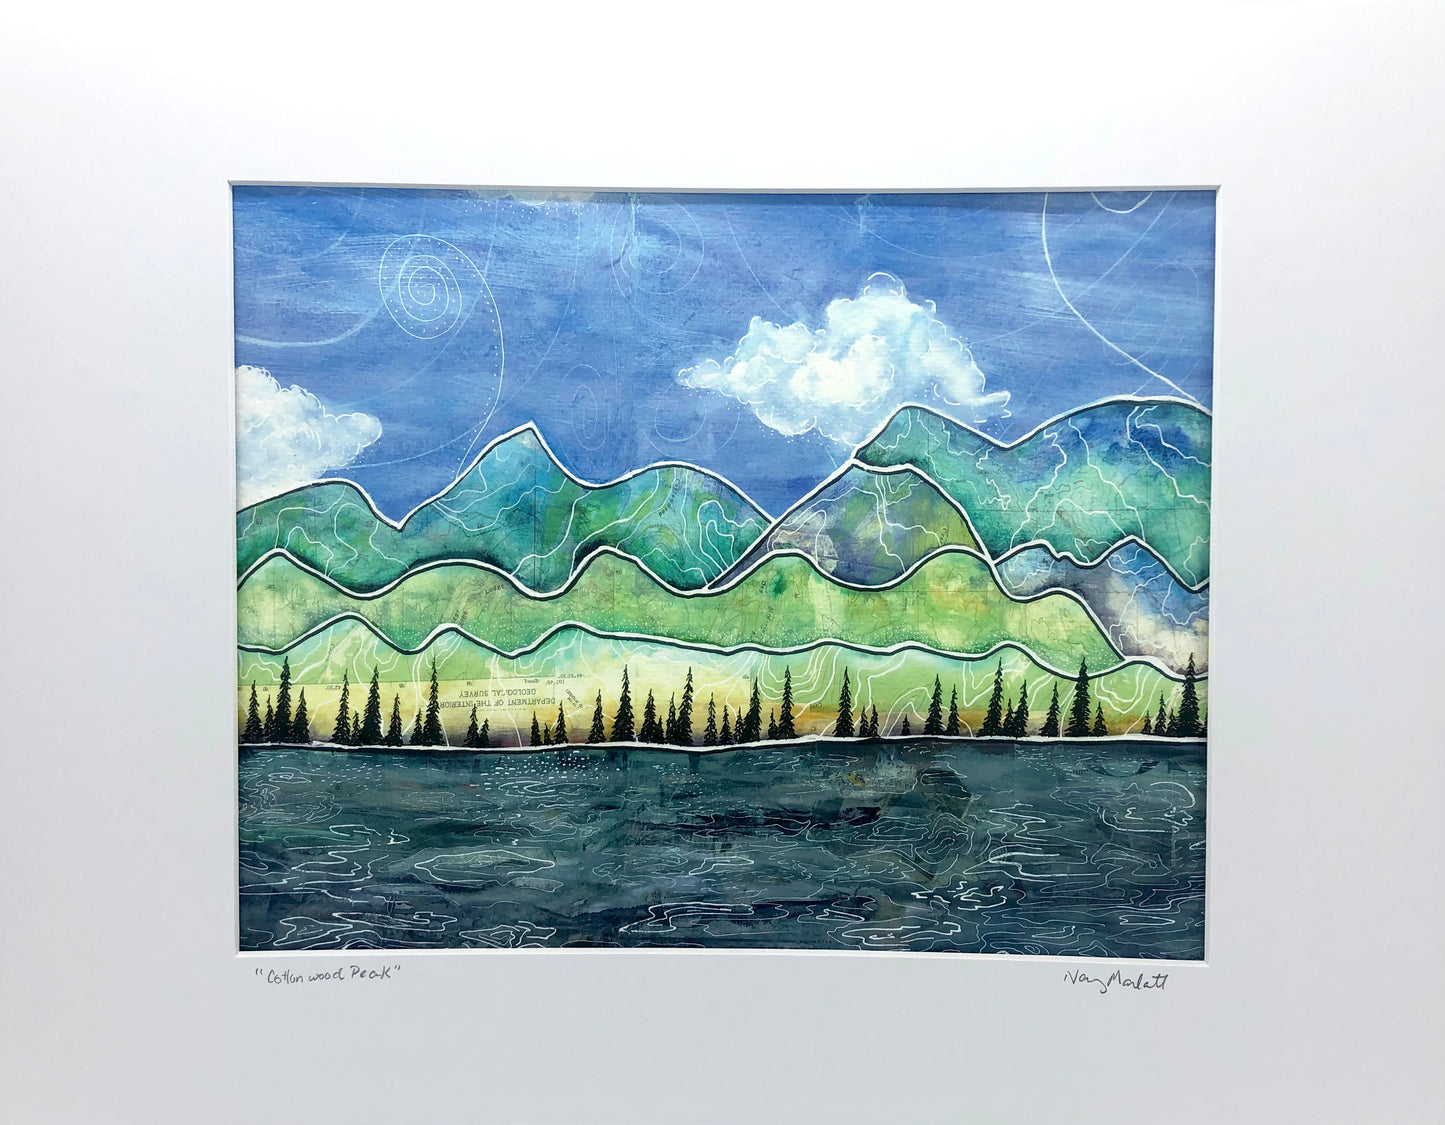 " Cottonwood Peak " print is from an original watercolor created by the artist for a public art installation project in Washington Park in Laramie Wyoming, Mountains and blue sky with pine trees